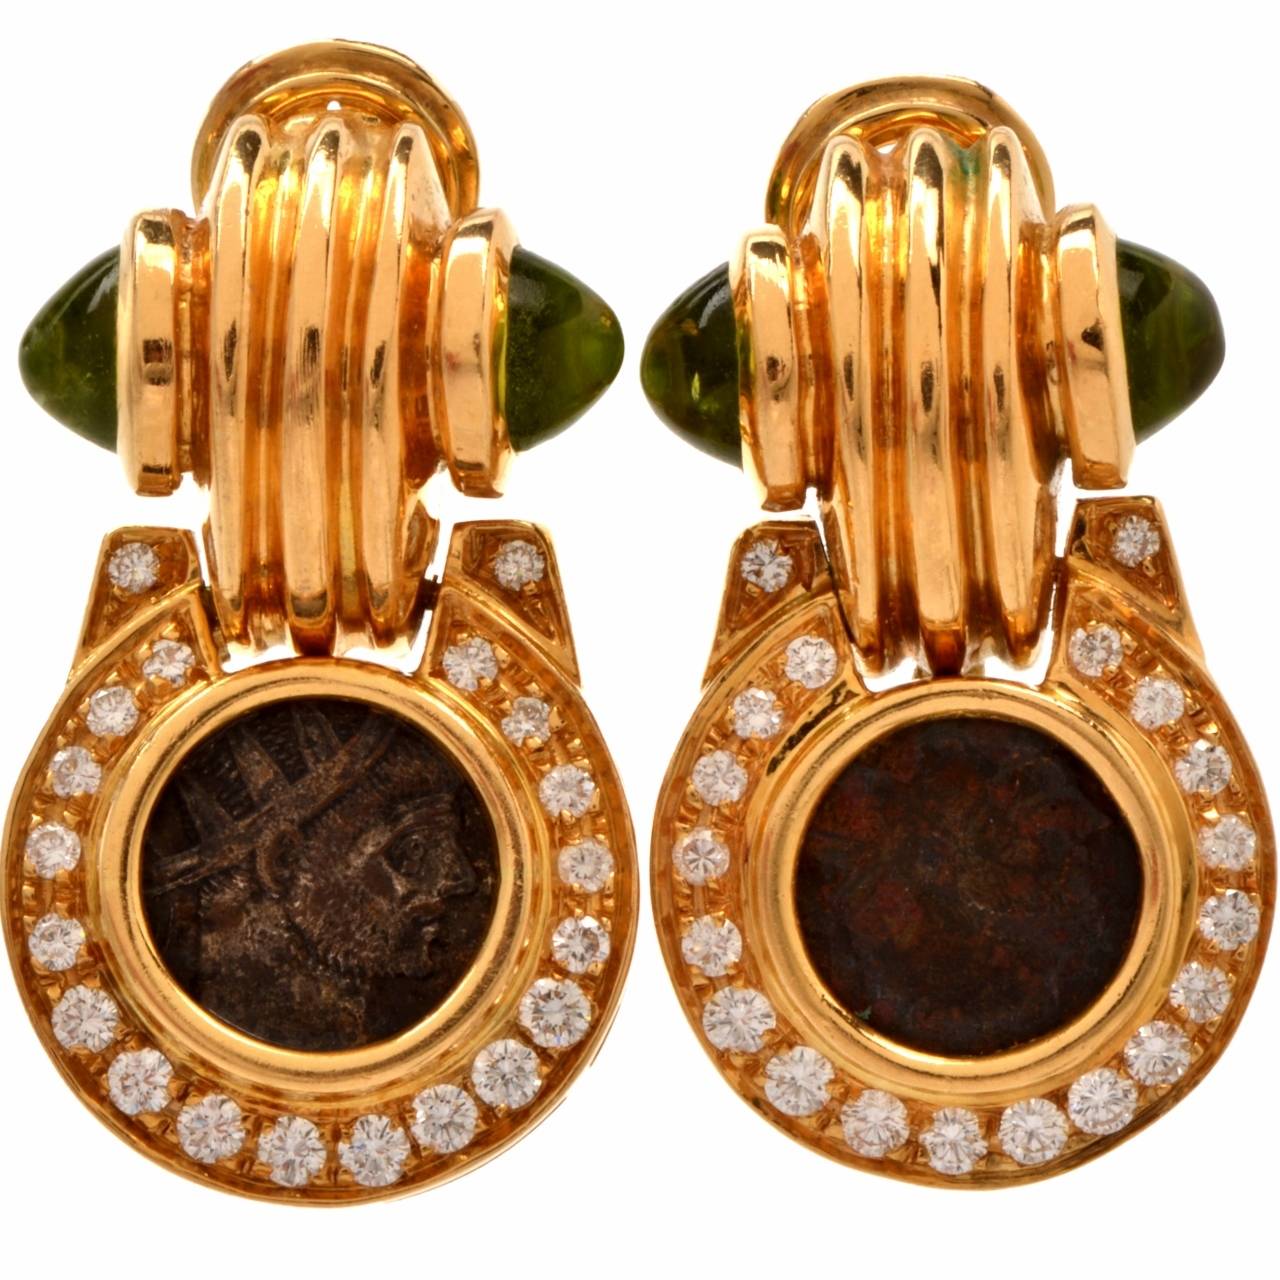 These earrings of creative style are crafted in solid 18K gold and weigh approx. 29.8 grams.  The earrings incorporate orbicular profiles centered with antique Roman coins, surrounded by  diamond borders, surmounted by immaculately ridged,